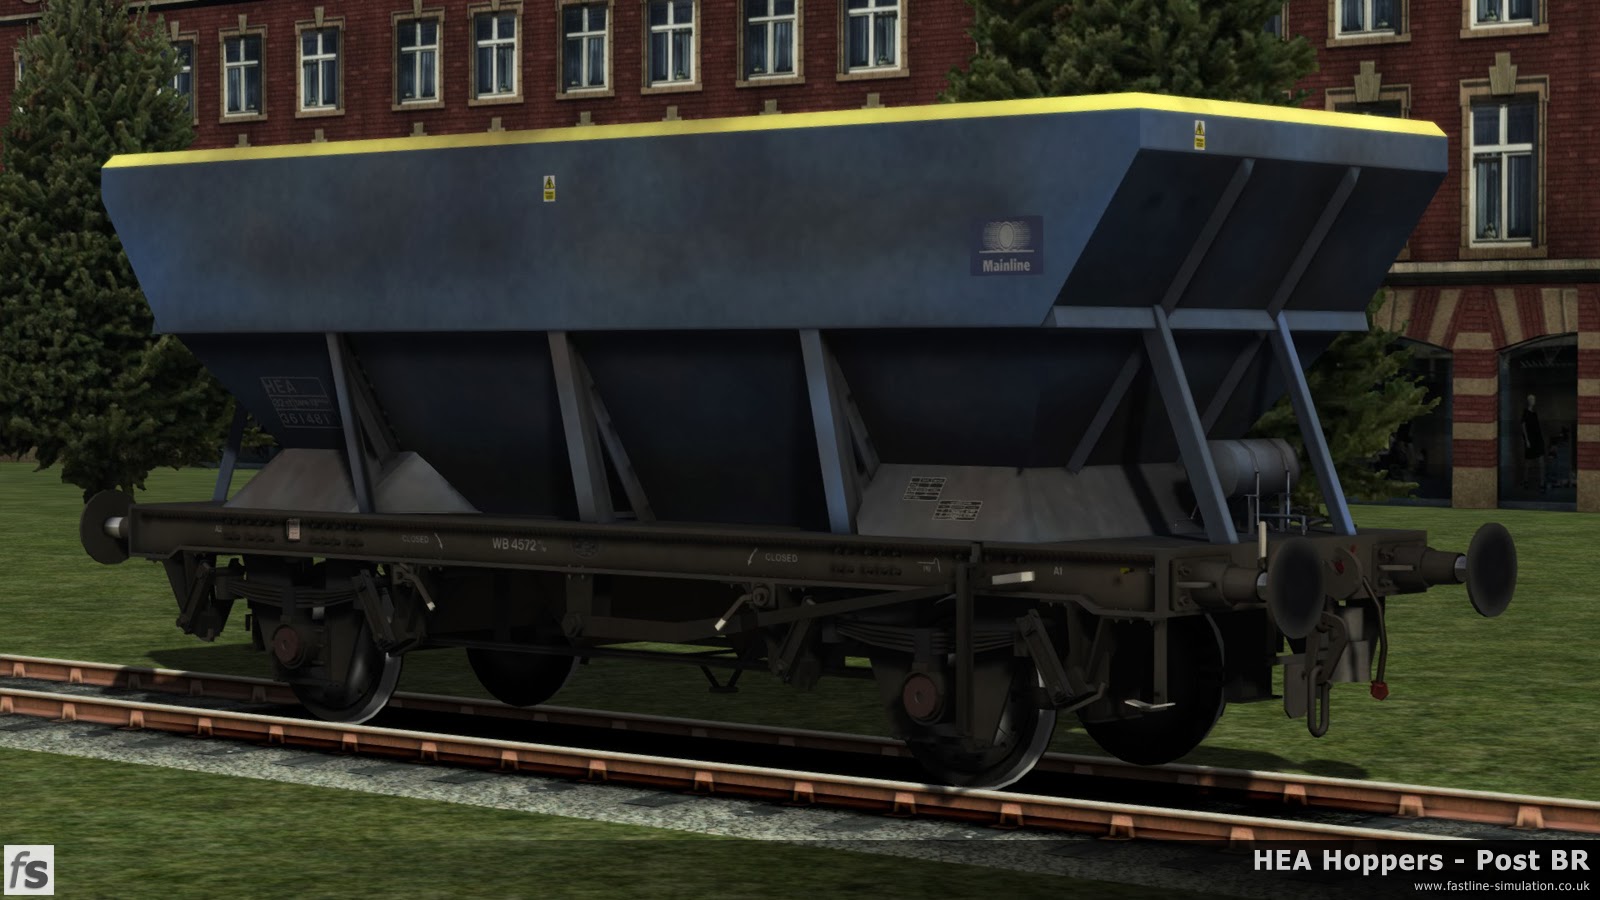 HEA Hoppers - Post BR: What would have been a later built HEA hopper with an offset ladders (now removed) in faded and grubby Mainline livery for Train Simulator 2014.